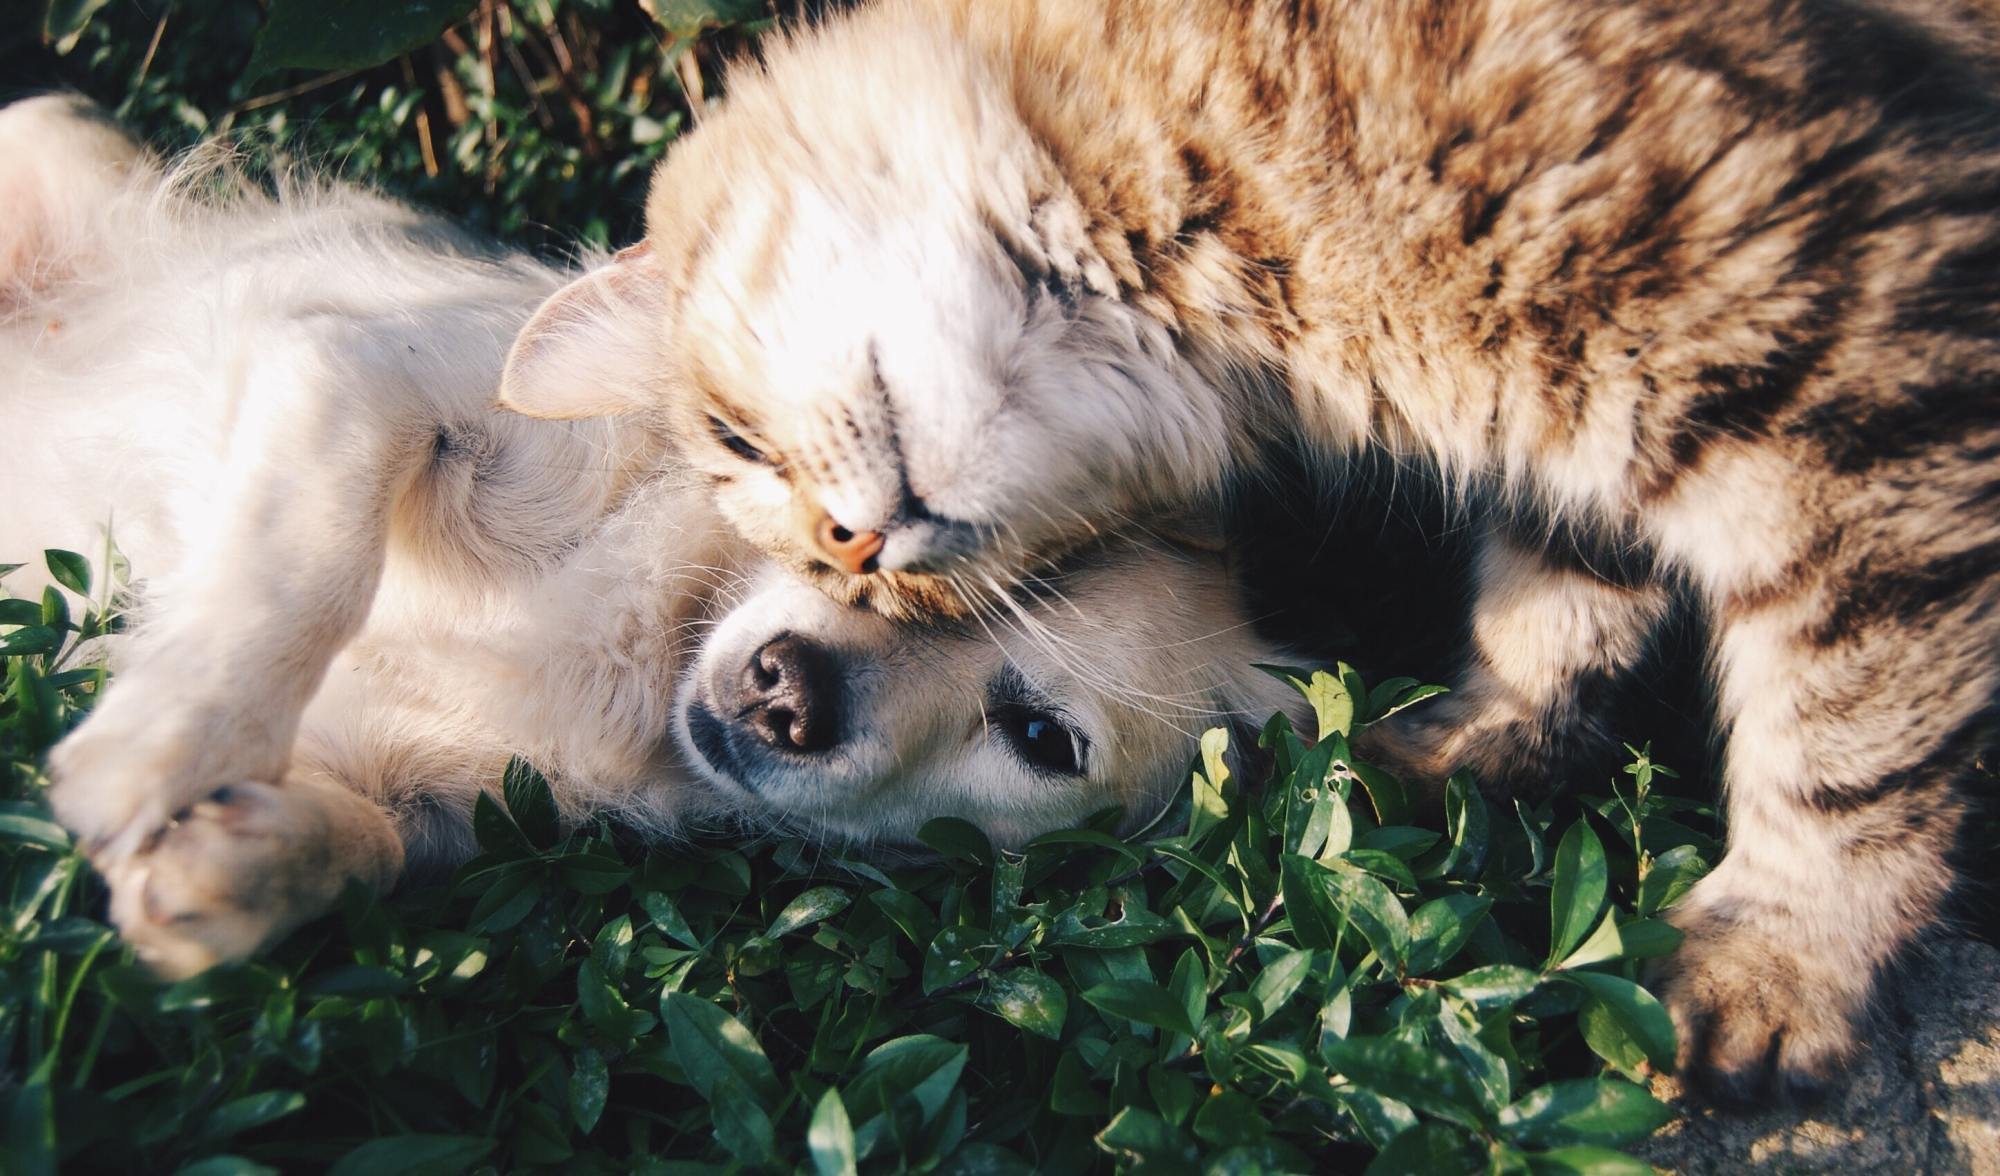 photo of a cat nuzzling a dog